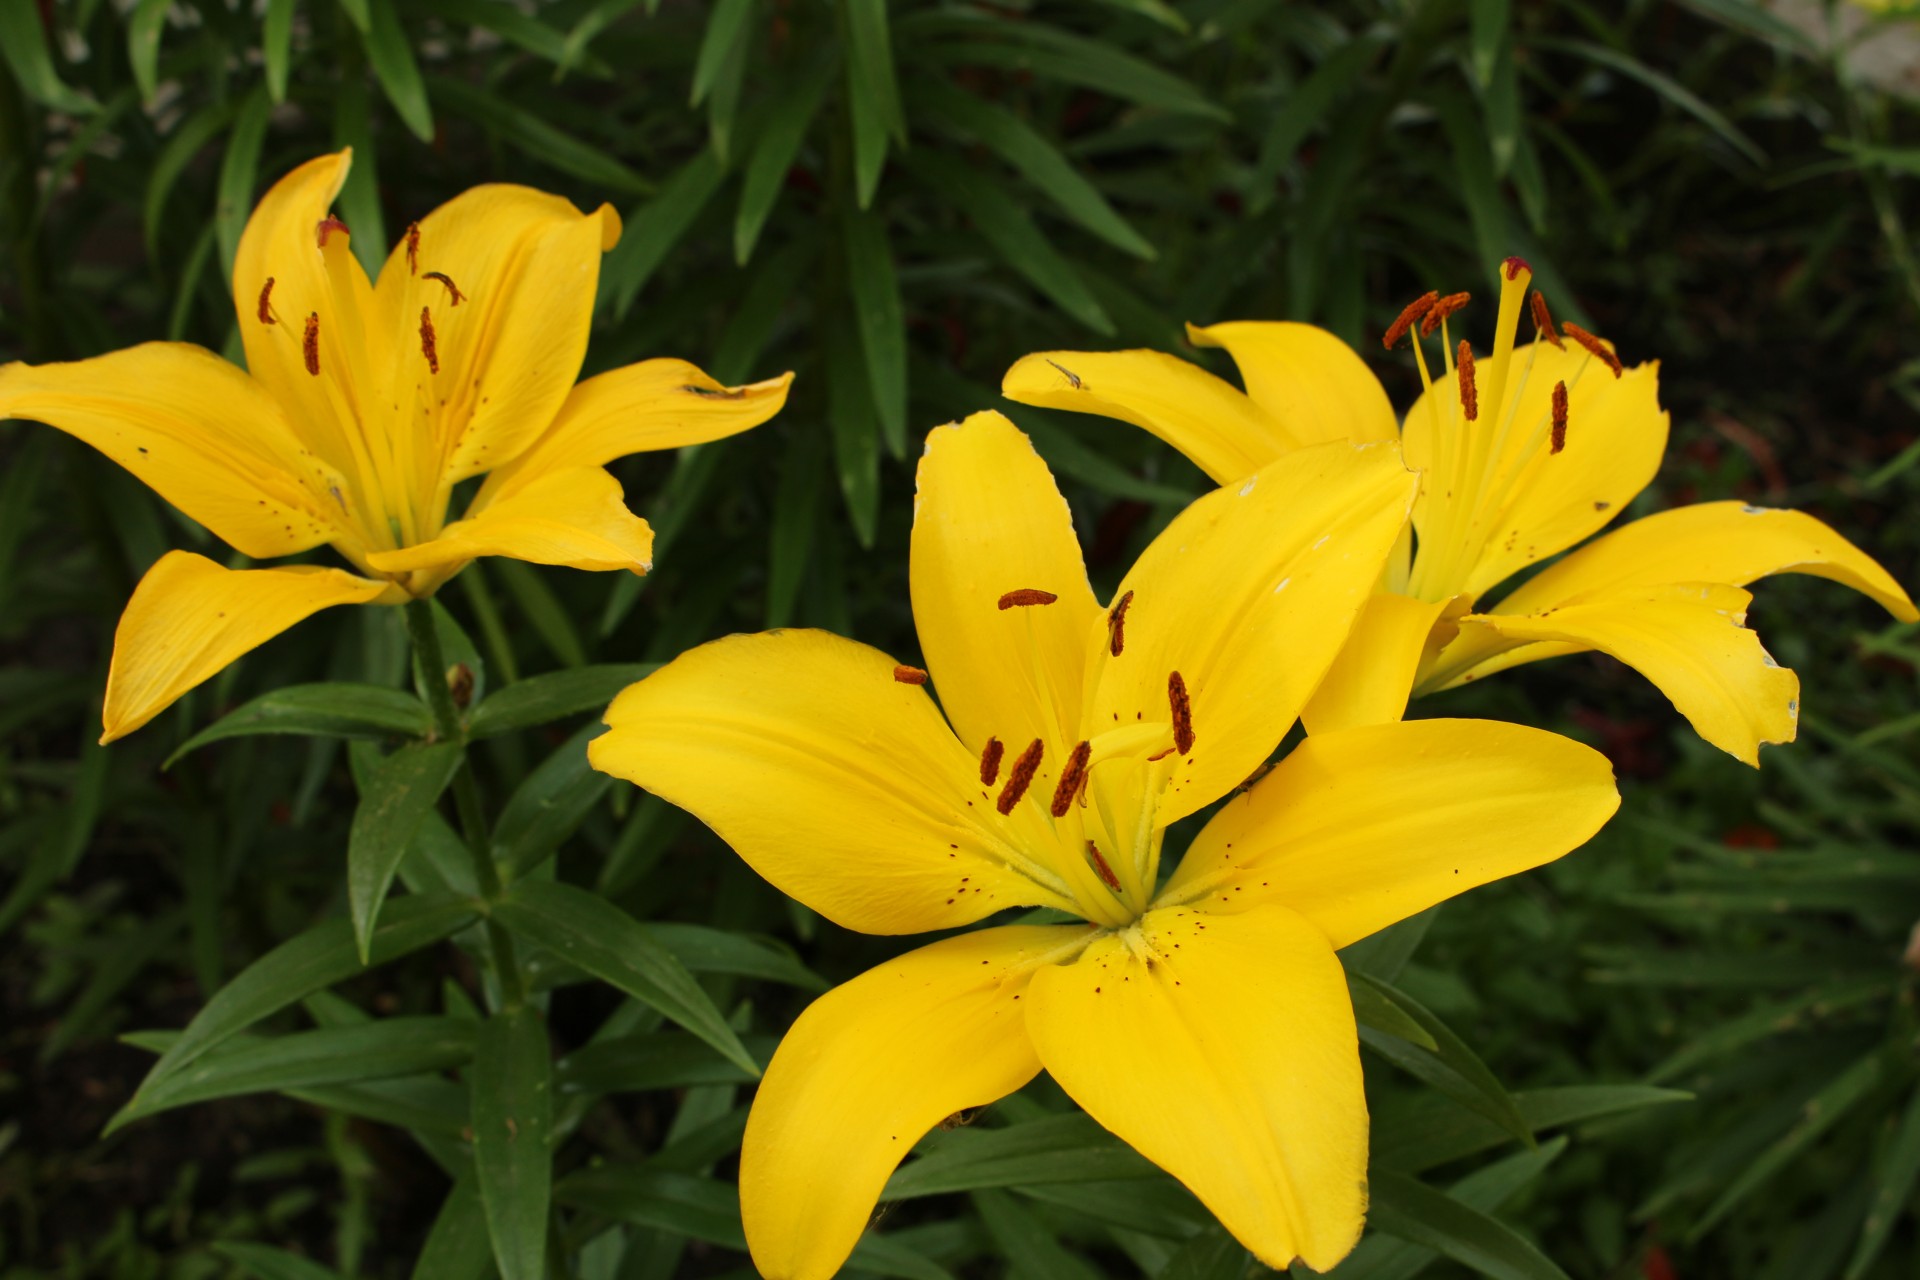 File:Lily.jpg - Wikimedia Commons